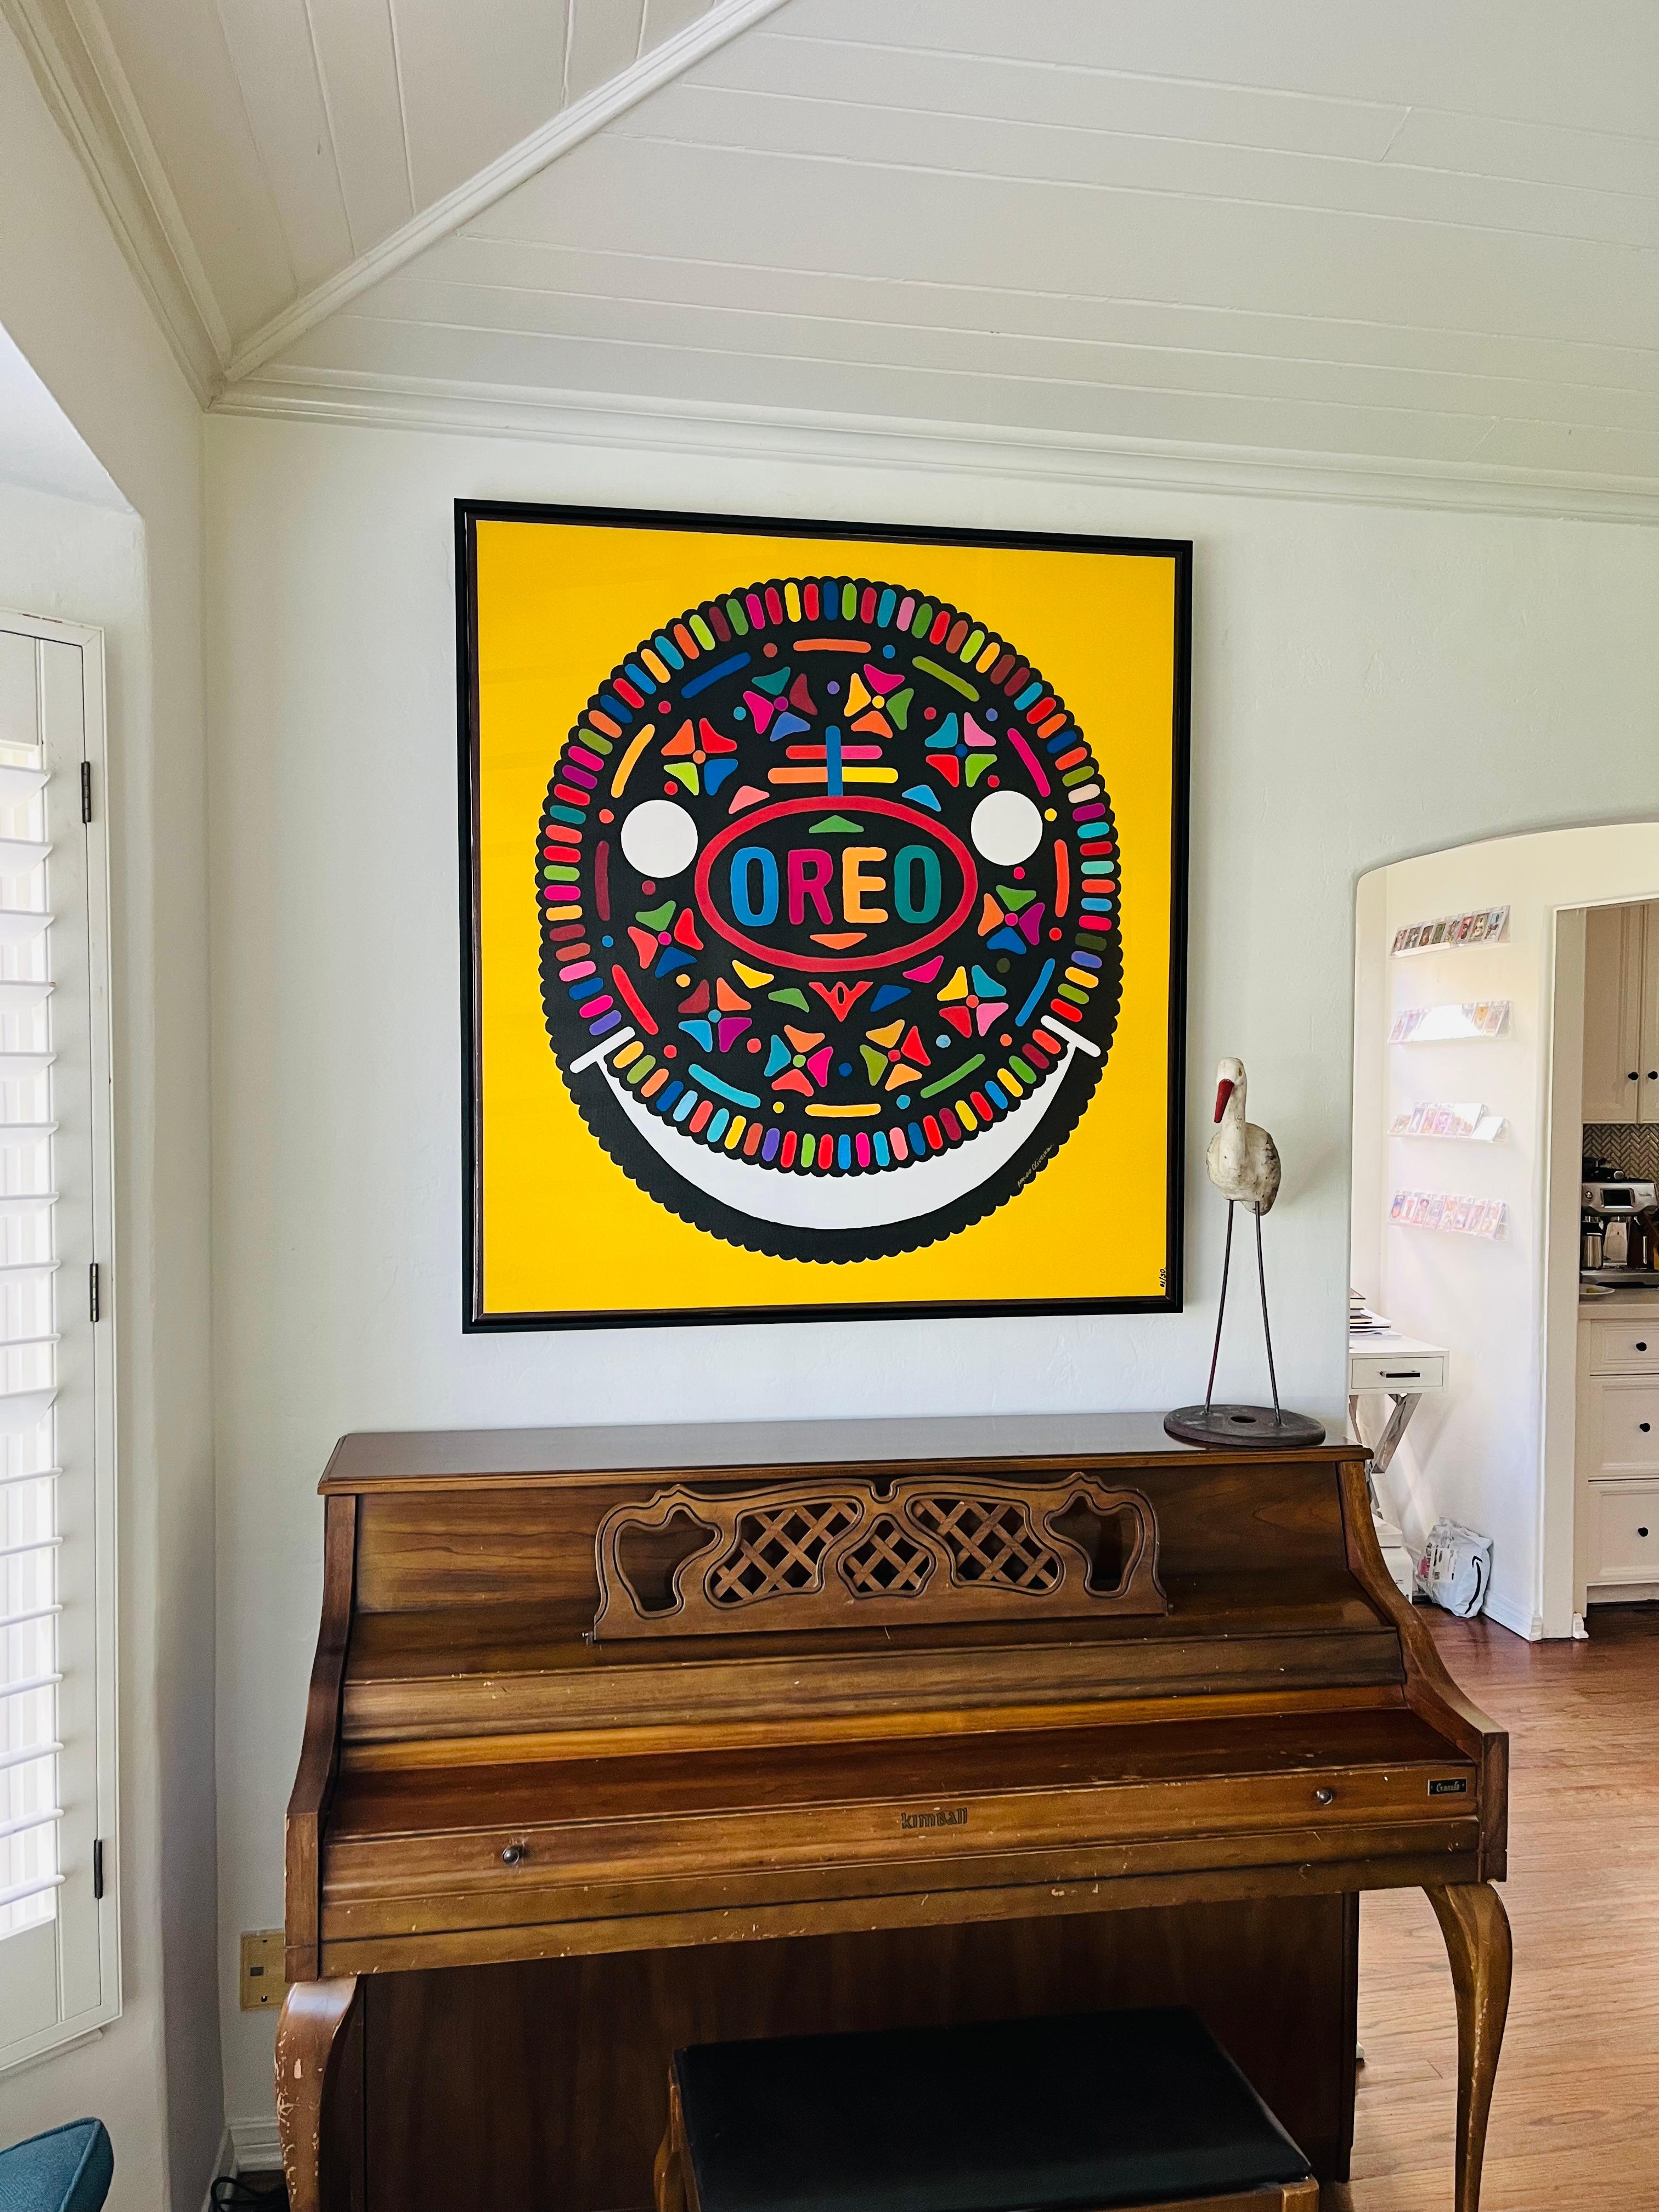               **ANNUAL SUPER SALE UNTIL MAY 15TH ONLY**
**This Price Won't Be Repeated Again This Year - Take Advantage**

Introducing the FRAMED and ready for the wall OREO HAPPY HOUR limited edition at 42